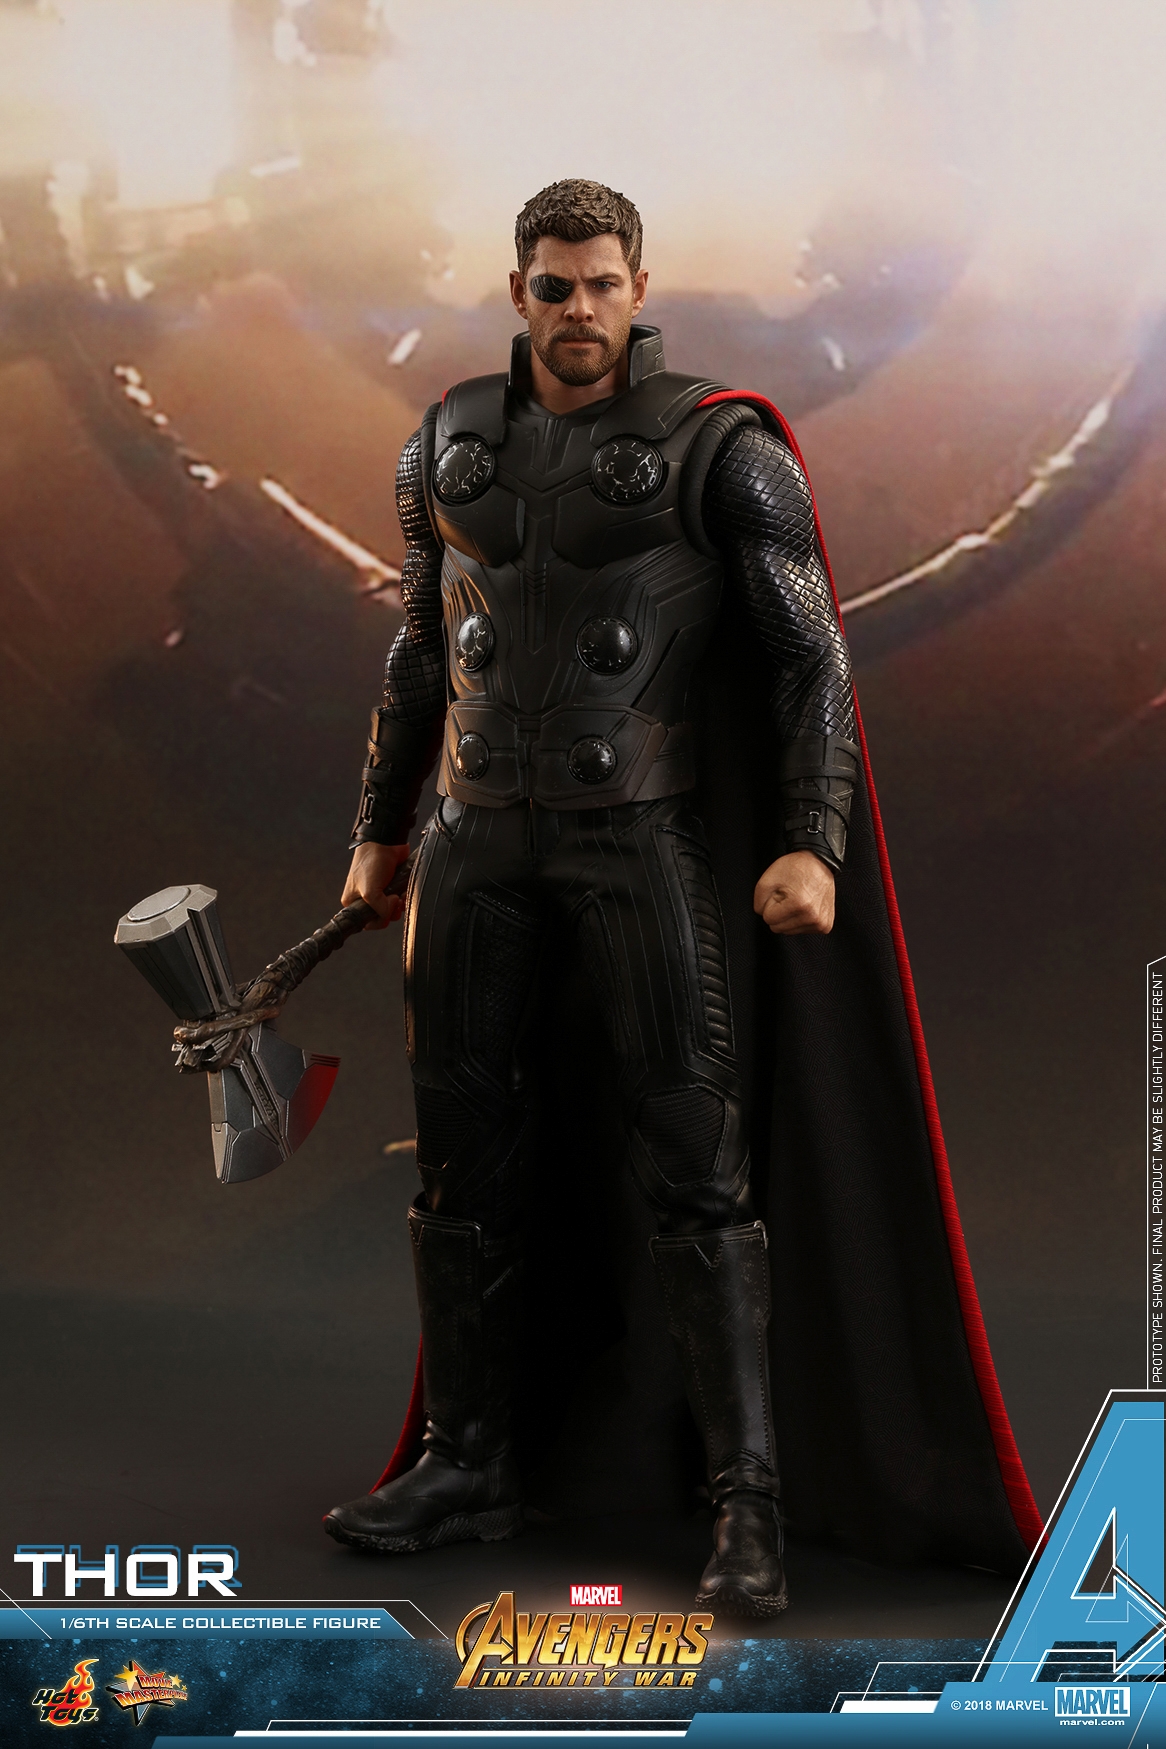 Hot-Toys-MMS474-Avengers-Infinity-War-Thor-Collectible-Figure-005.jpg